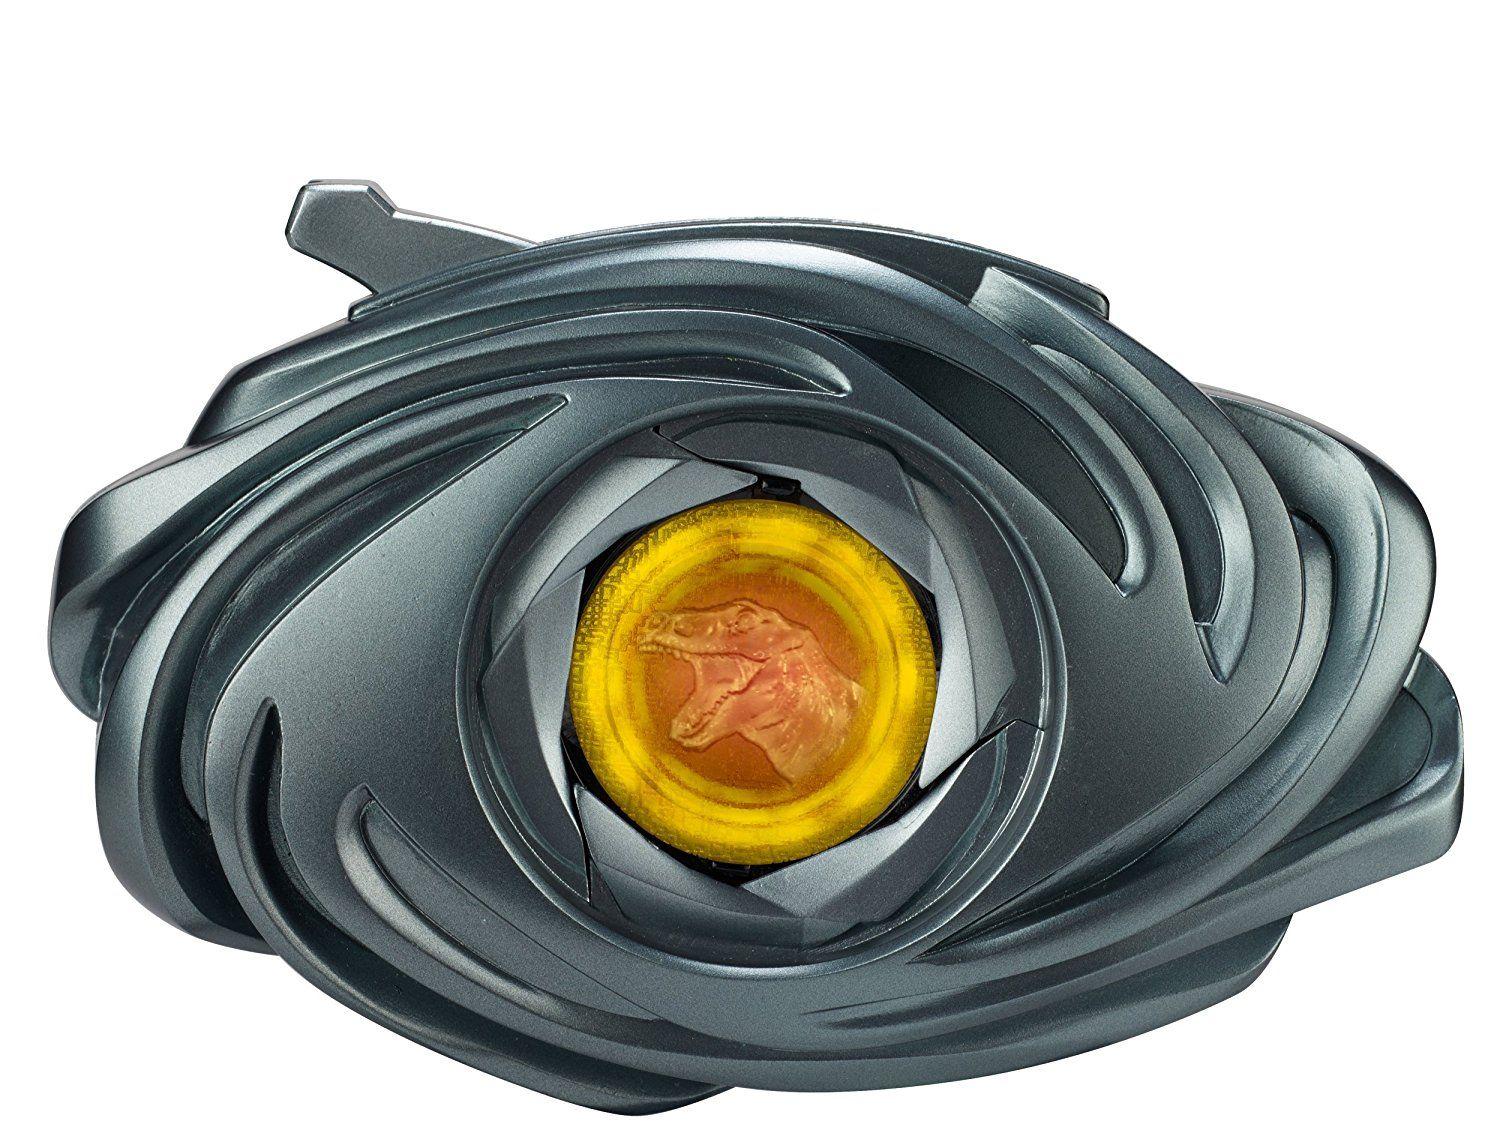 Power Rangers Movie Power Morpher with Power Coins